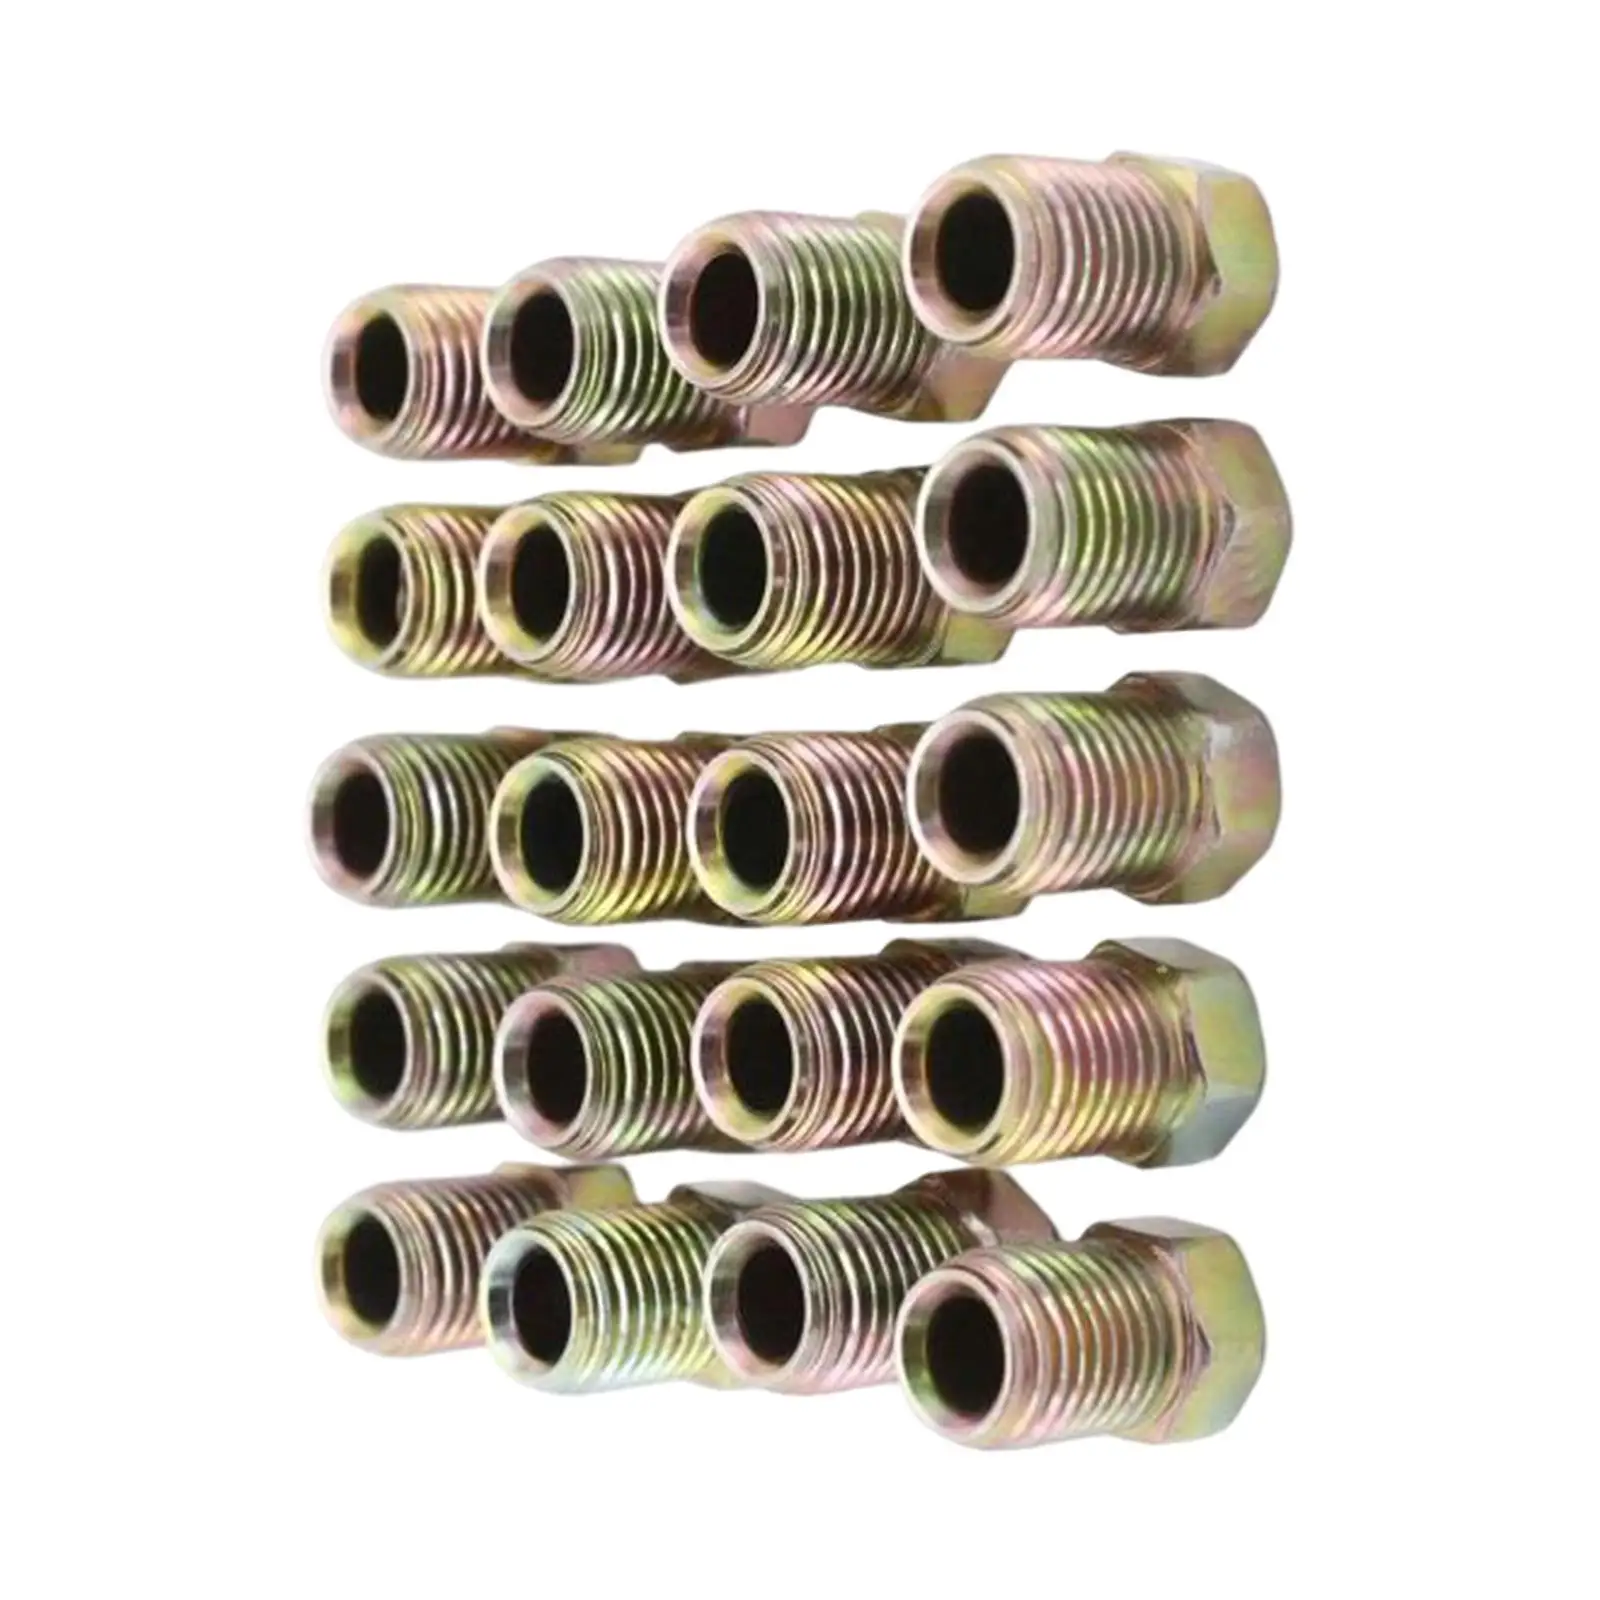 20-Pack 3/8-24 Inverted Flare Tube Nuts Auto Parts Threads Nuts Fits for 3/16 inch Tube